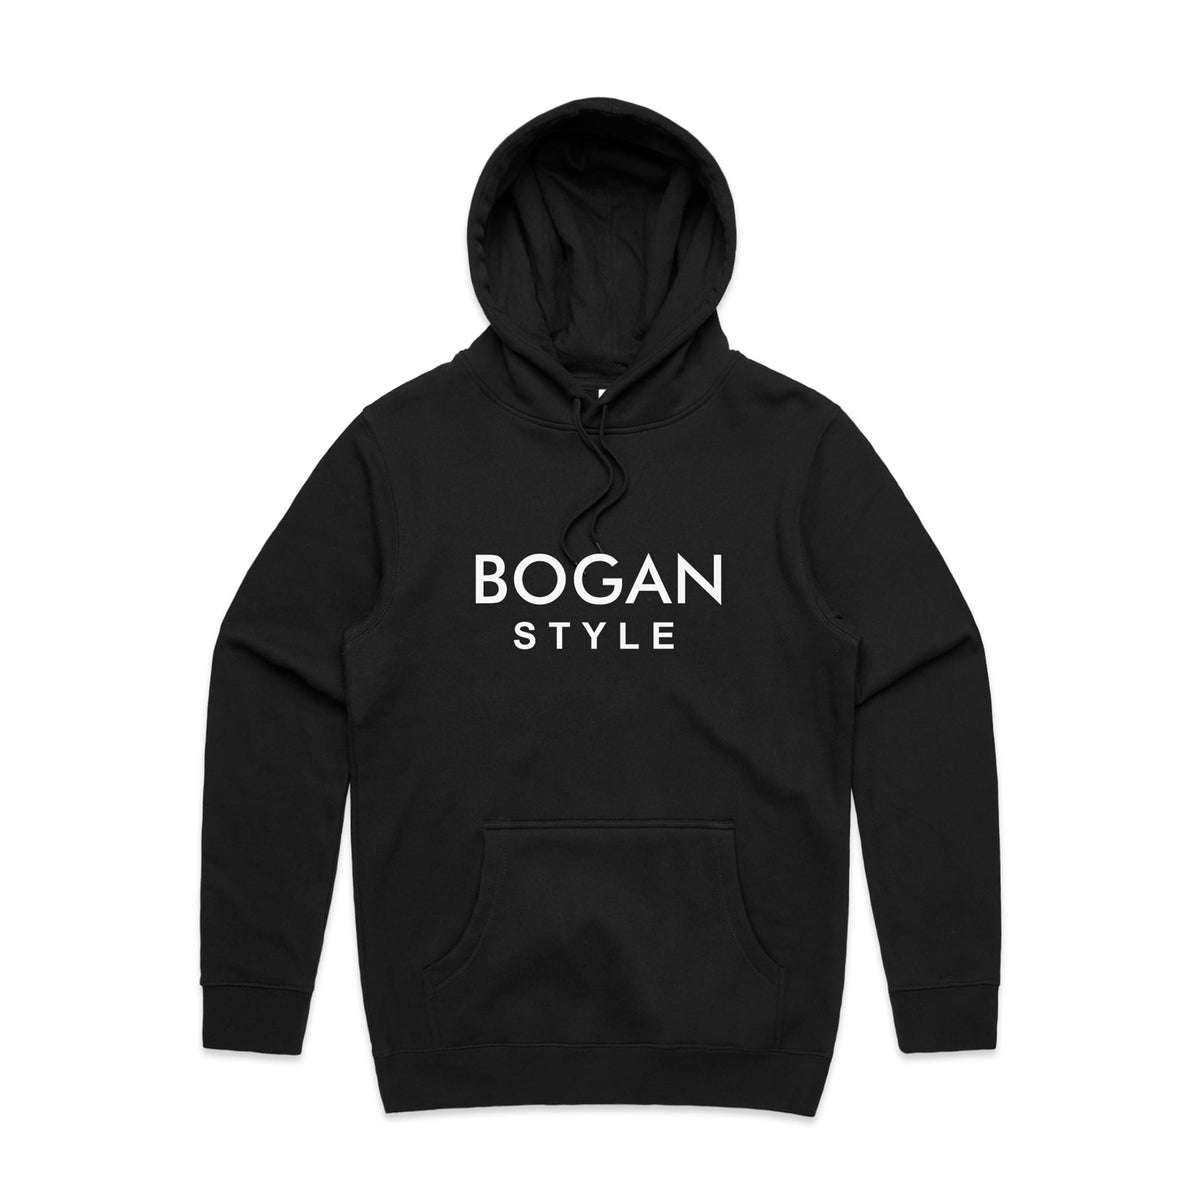 Flat view of black hoodie with Bogan Style printed on the front